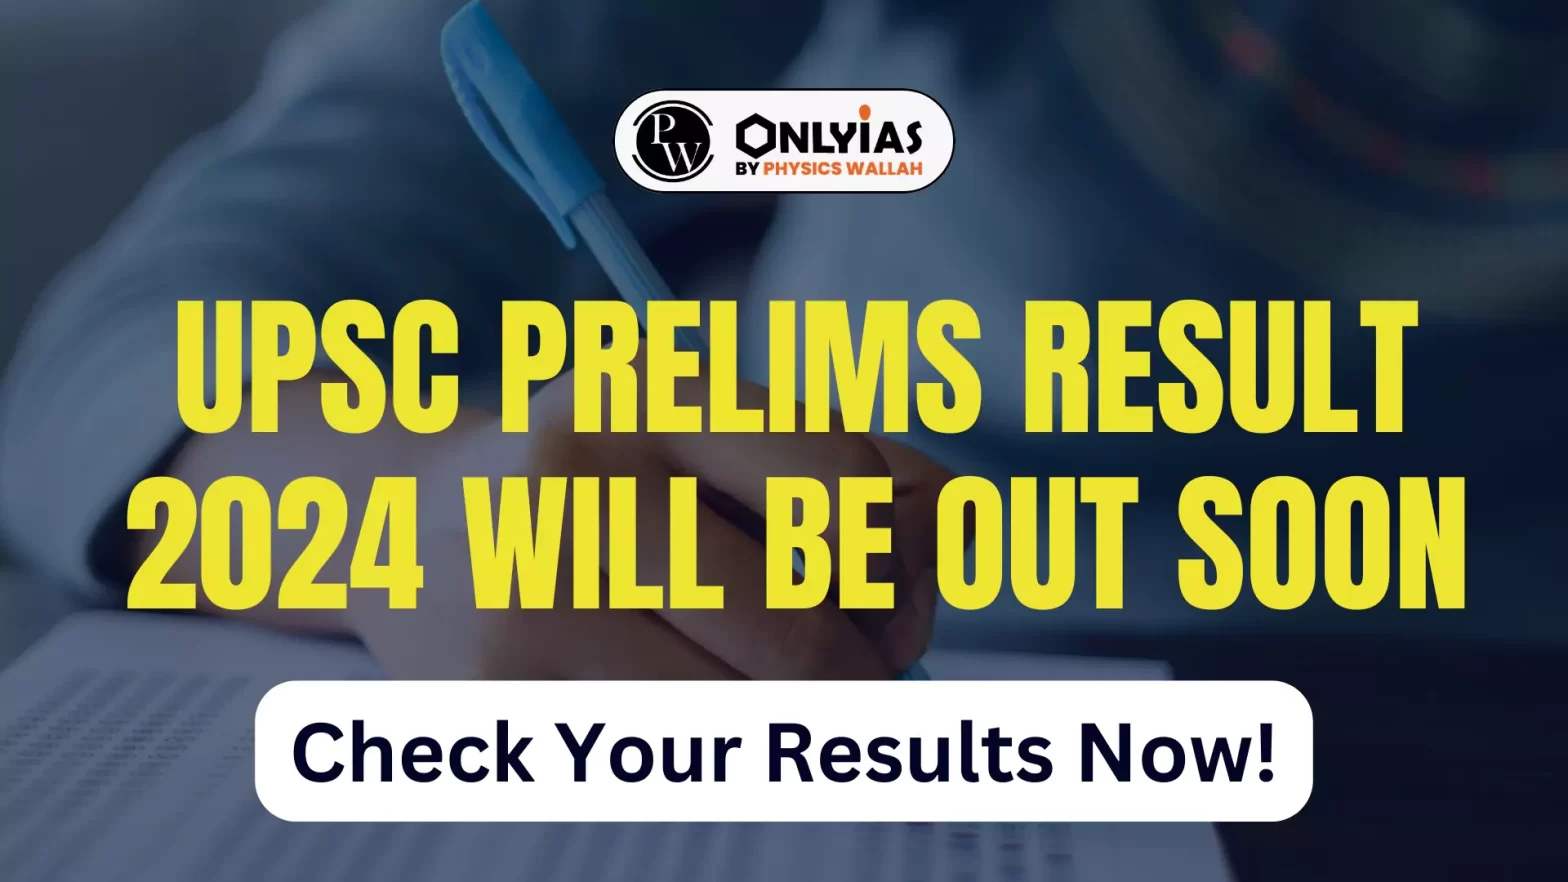 UPSC Prelims Result 2024 Will be Out Soon, Check Your Results Now!